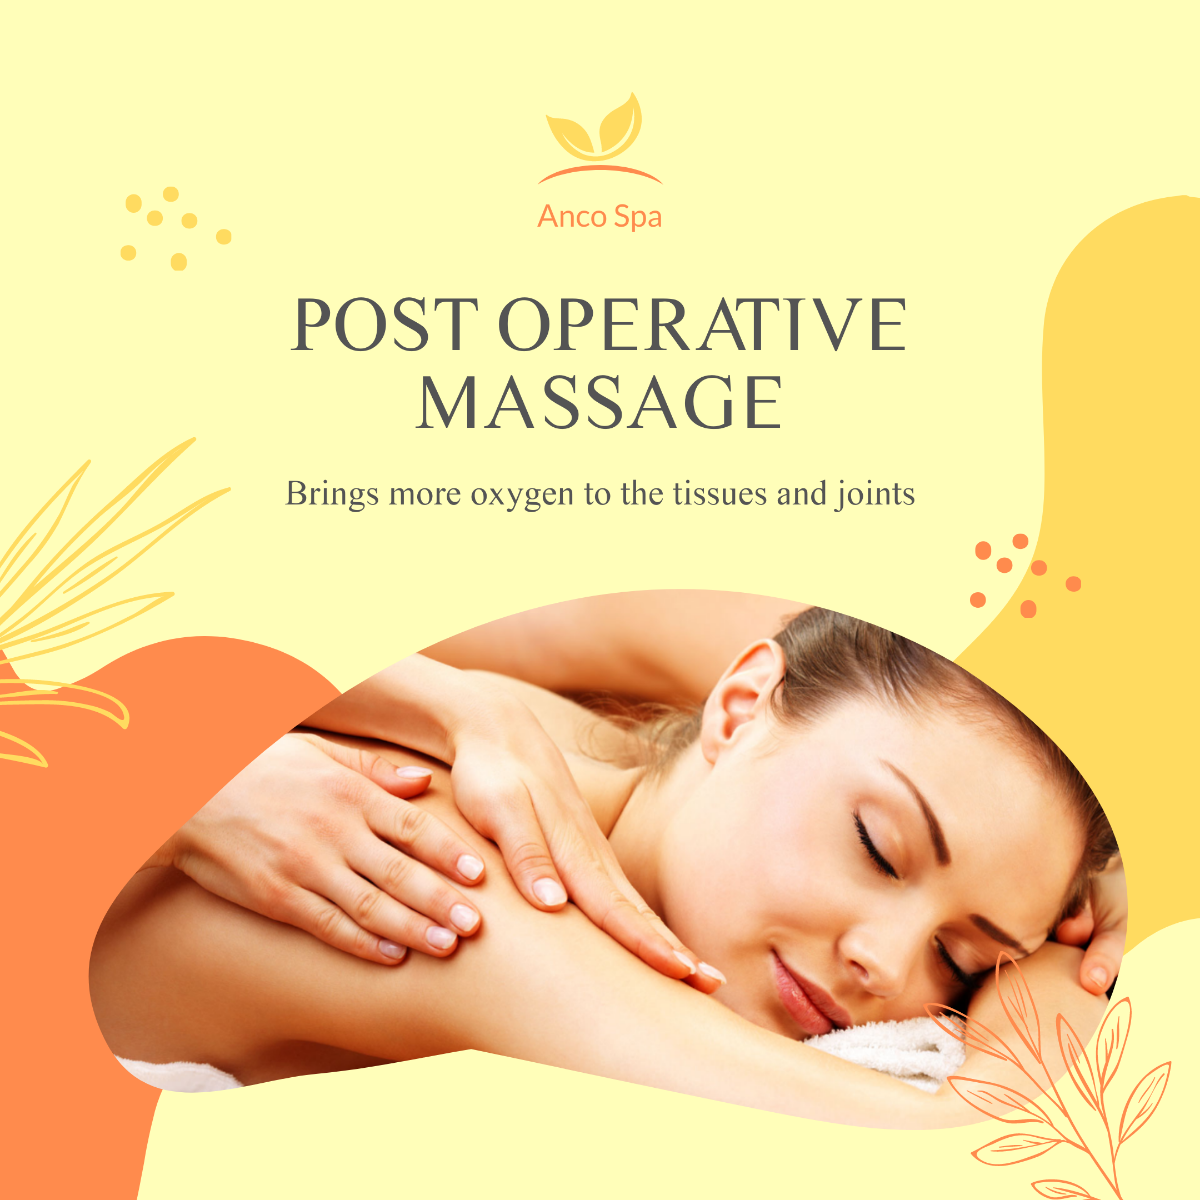 Free Post Operative Massage Therapy Post, Facebook, Instagram Template